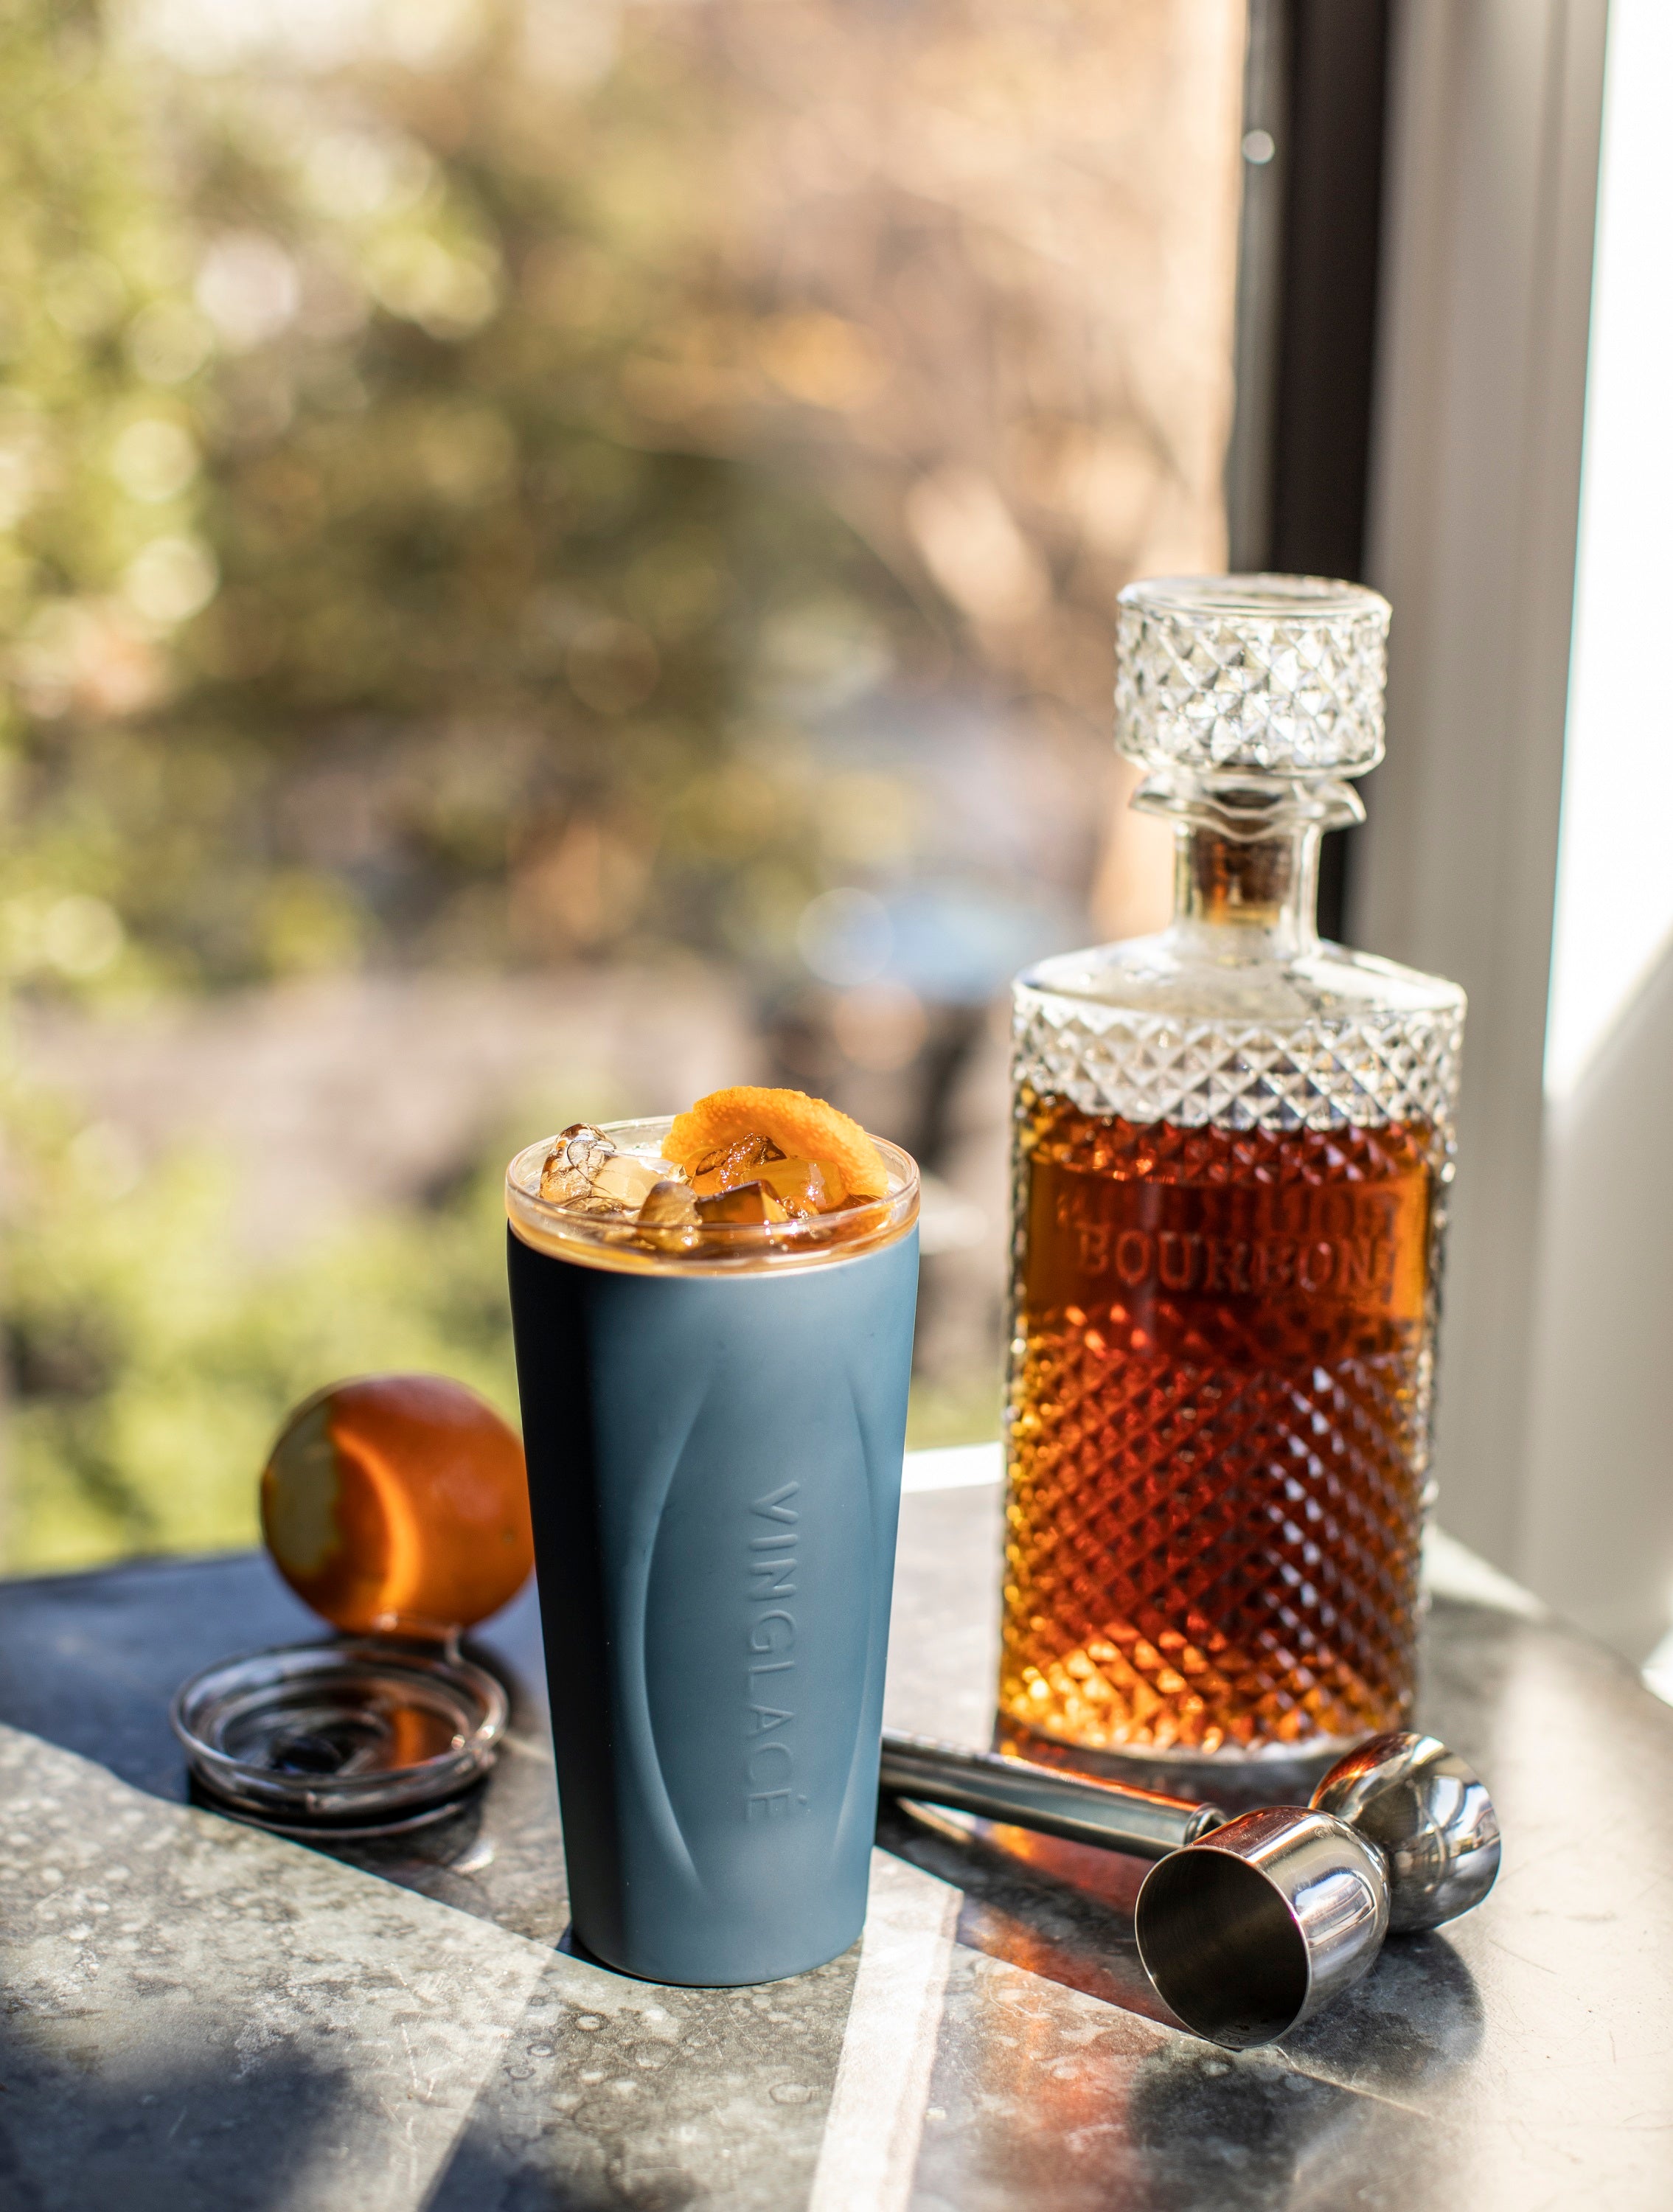 Maplefield Glass Tumbler with Dome Lid for Frappes, Smoothies & Iced Coffee  - Dishwasher Safe Glass …See more Maplefield Glass Tumbler with Dome Lid